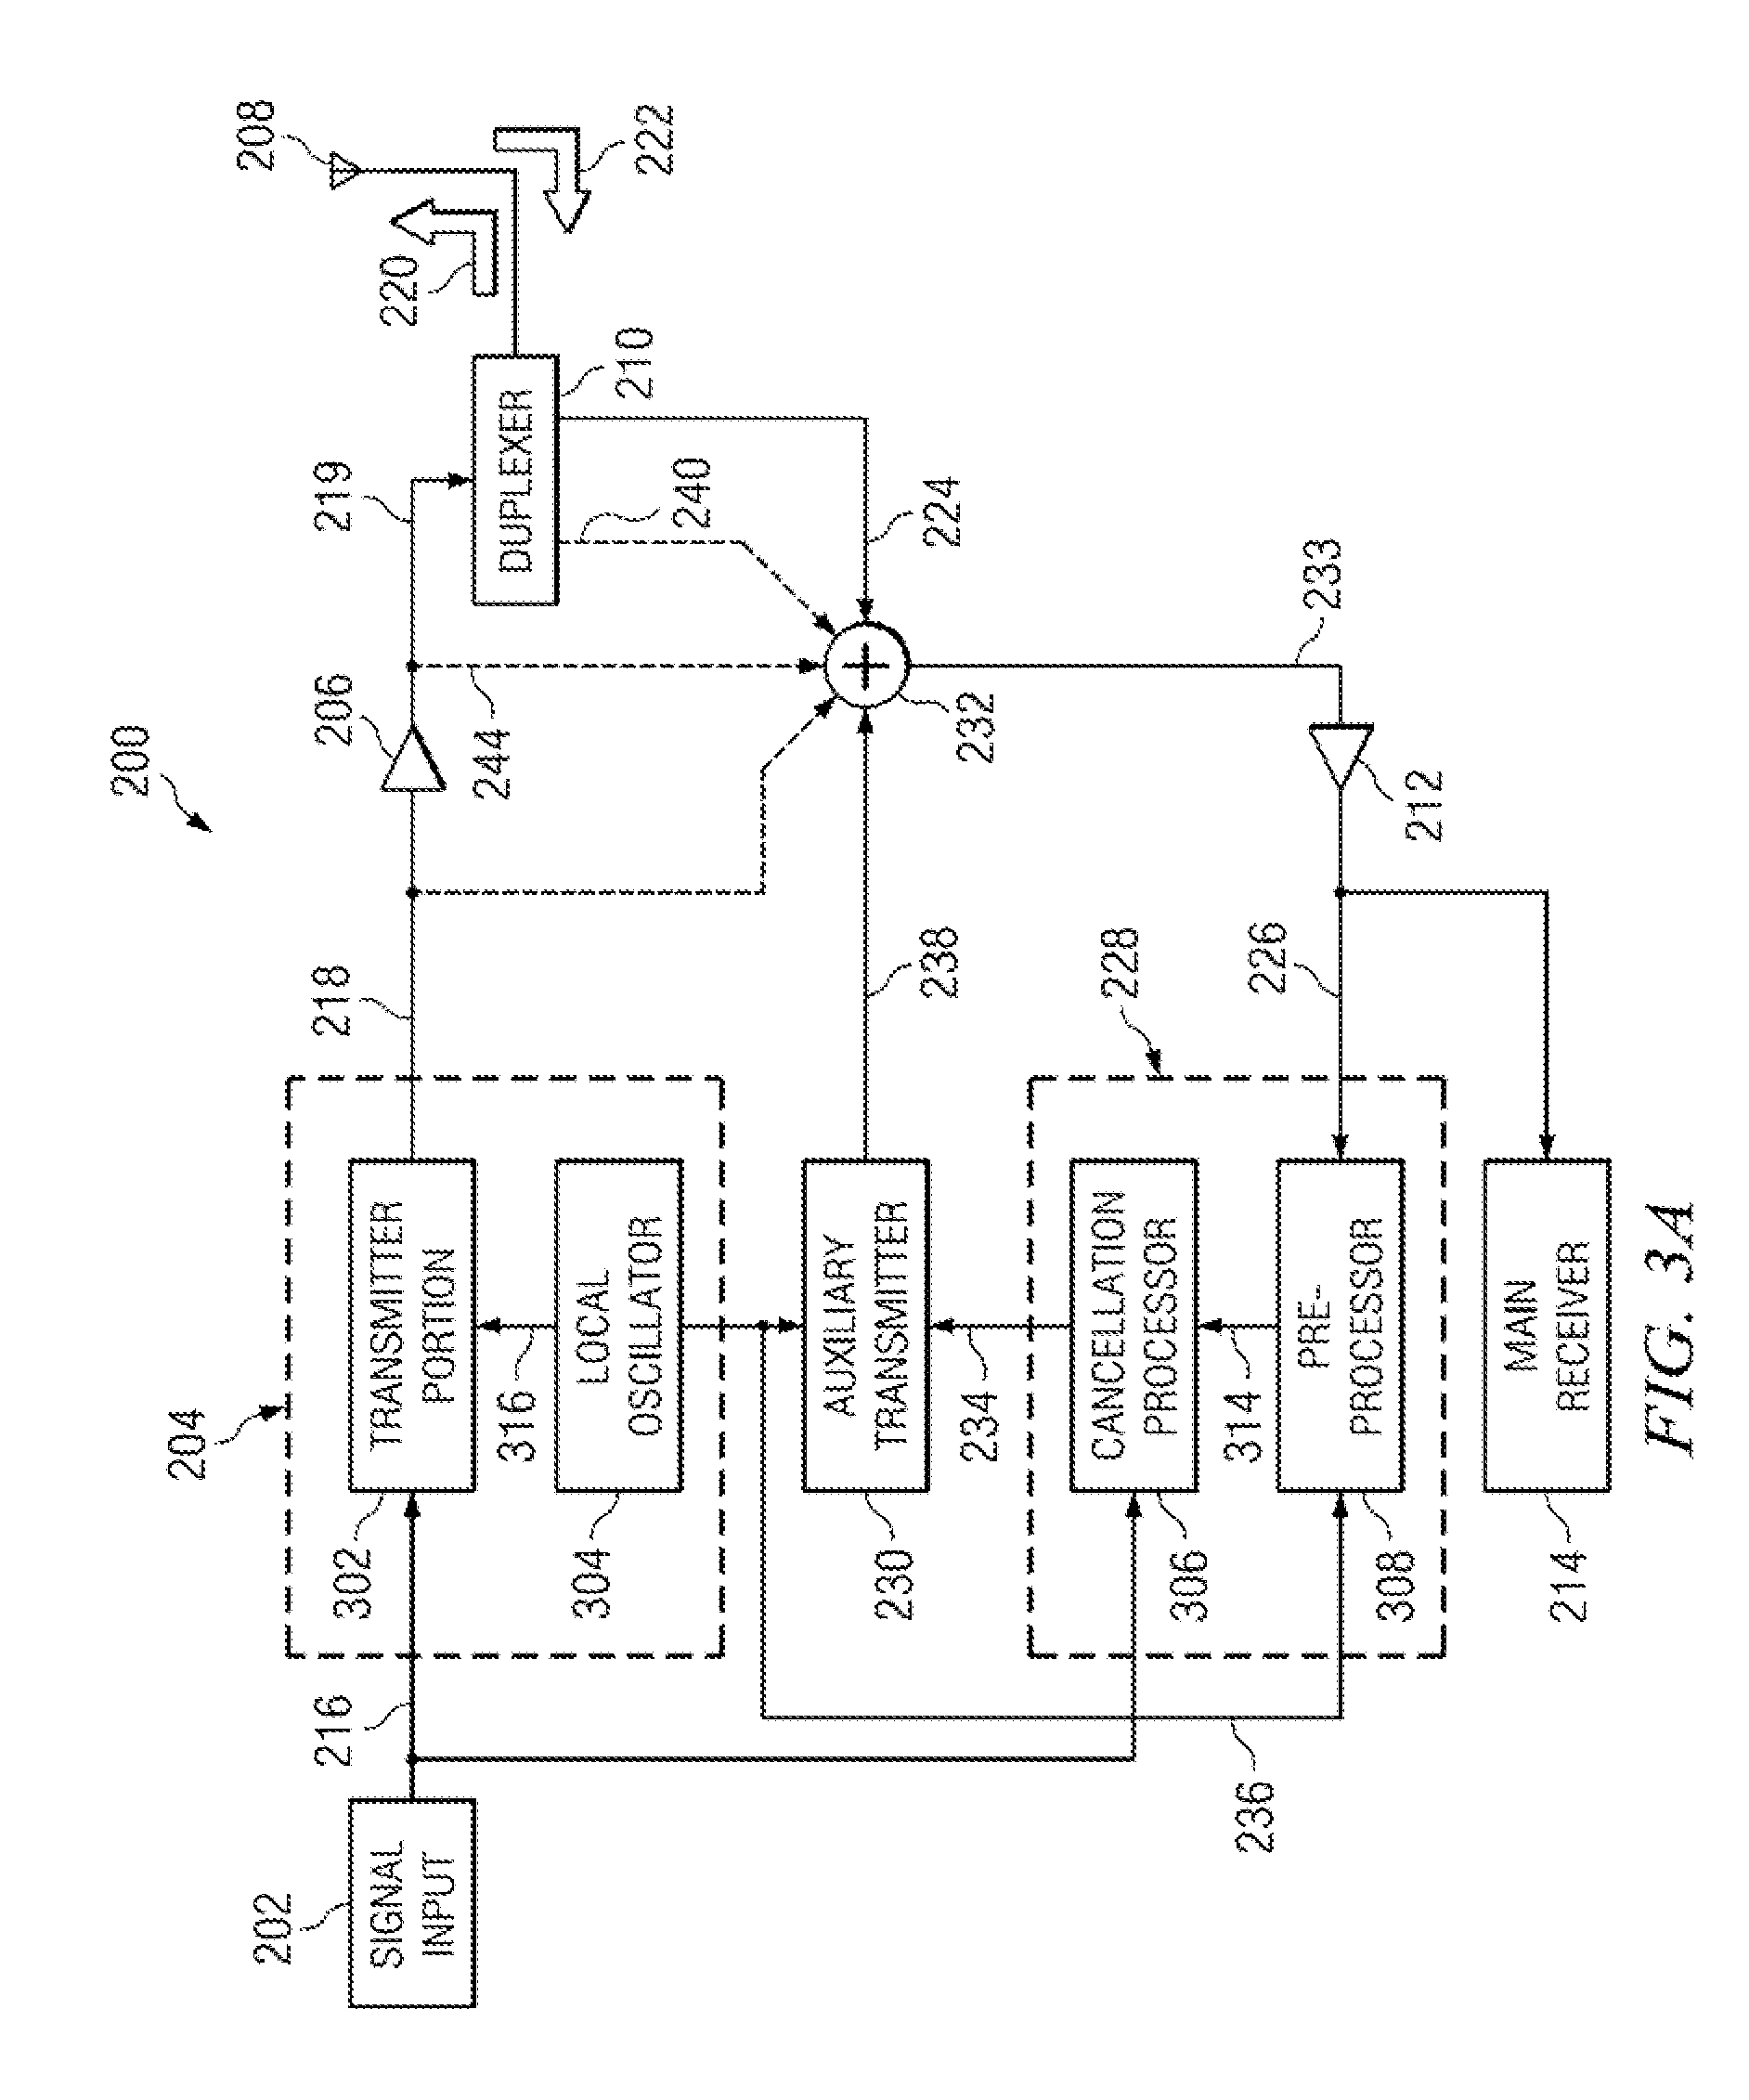 System and method for transmission interference cancellation in full duplex transceiver